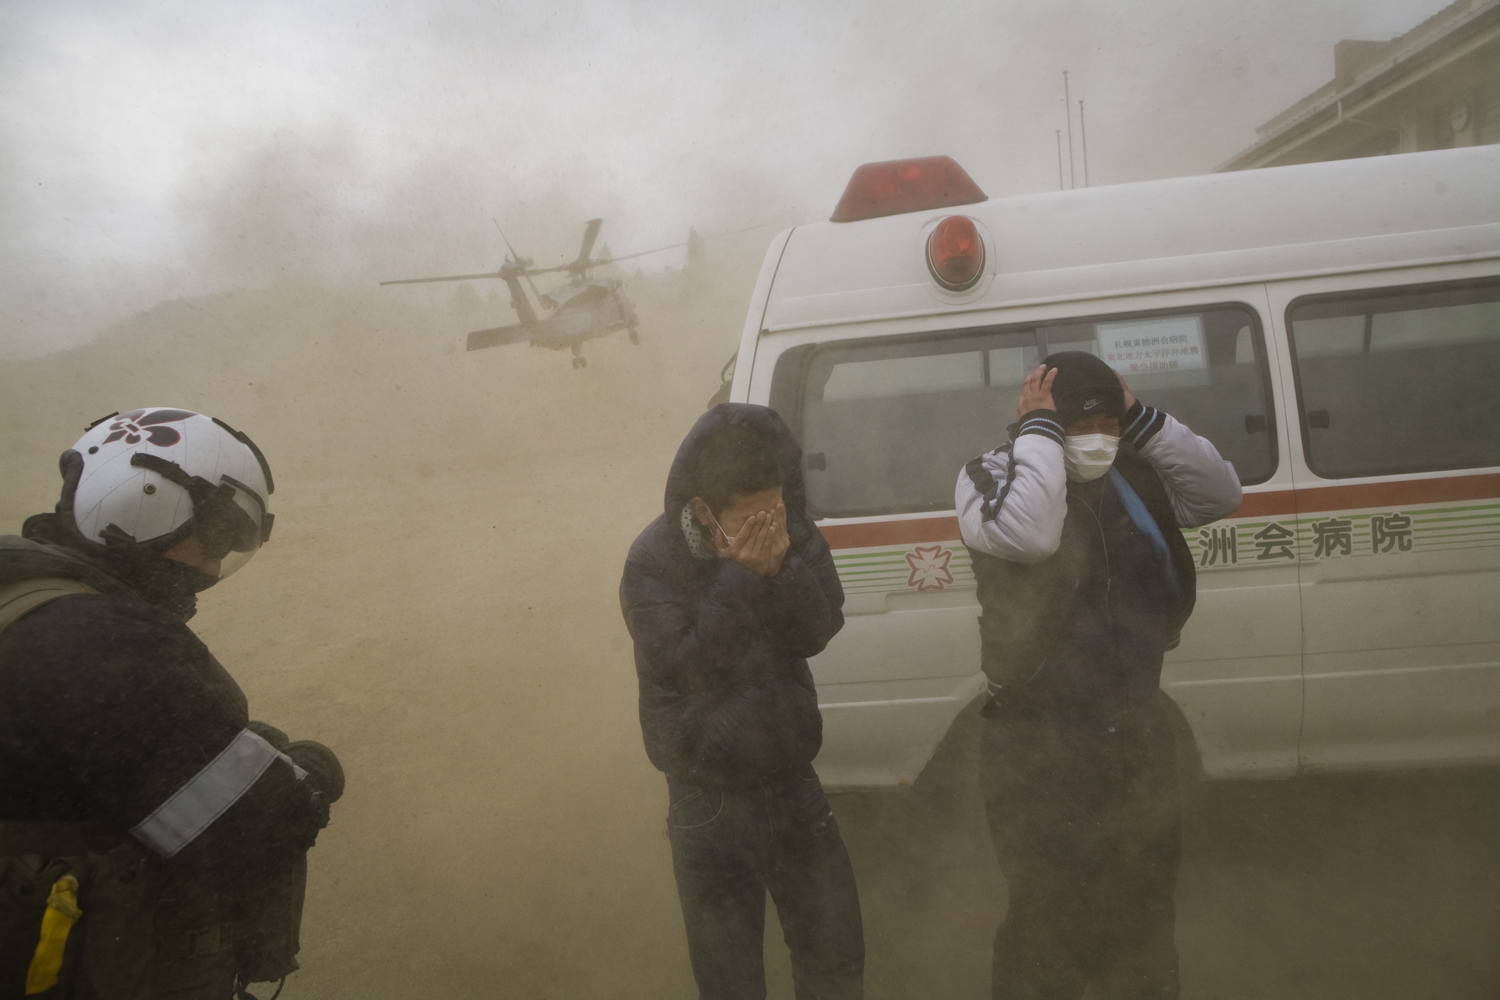 On the ground, workers protect themselves from dust as a helicopter with the Black Knights Helicopter Squadron delivering aid prepares to land in one of the damaged and isolated communities in the Sendai region. March 21, 2011